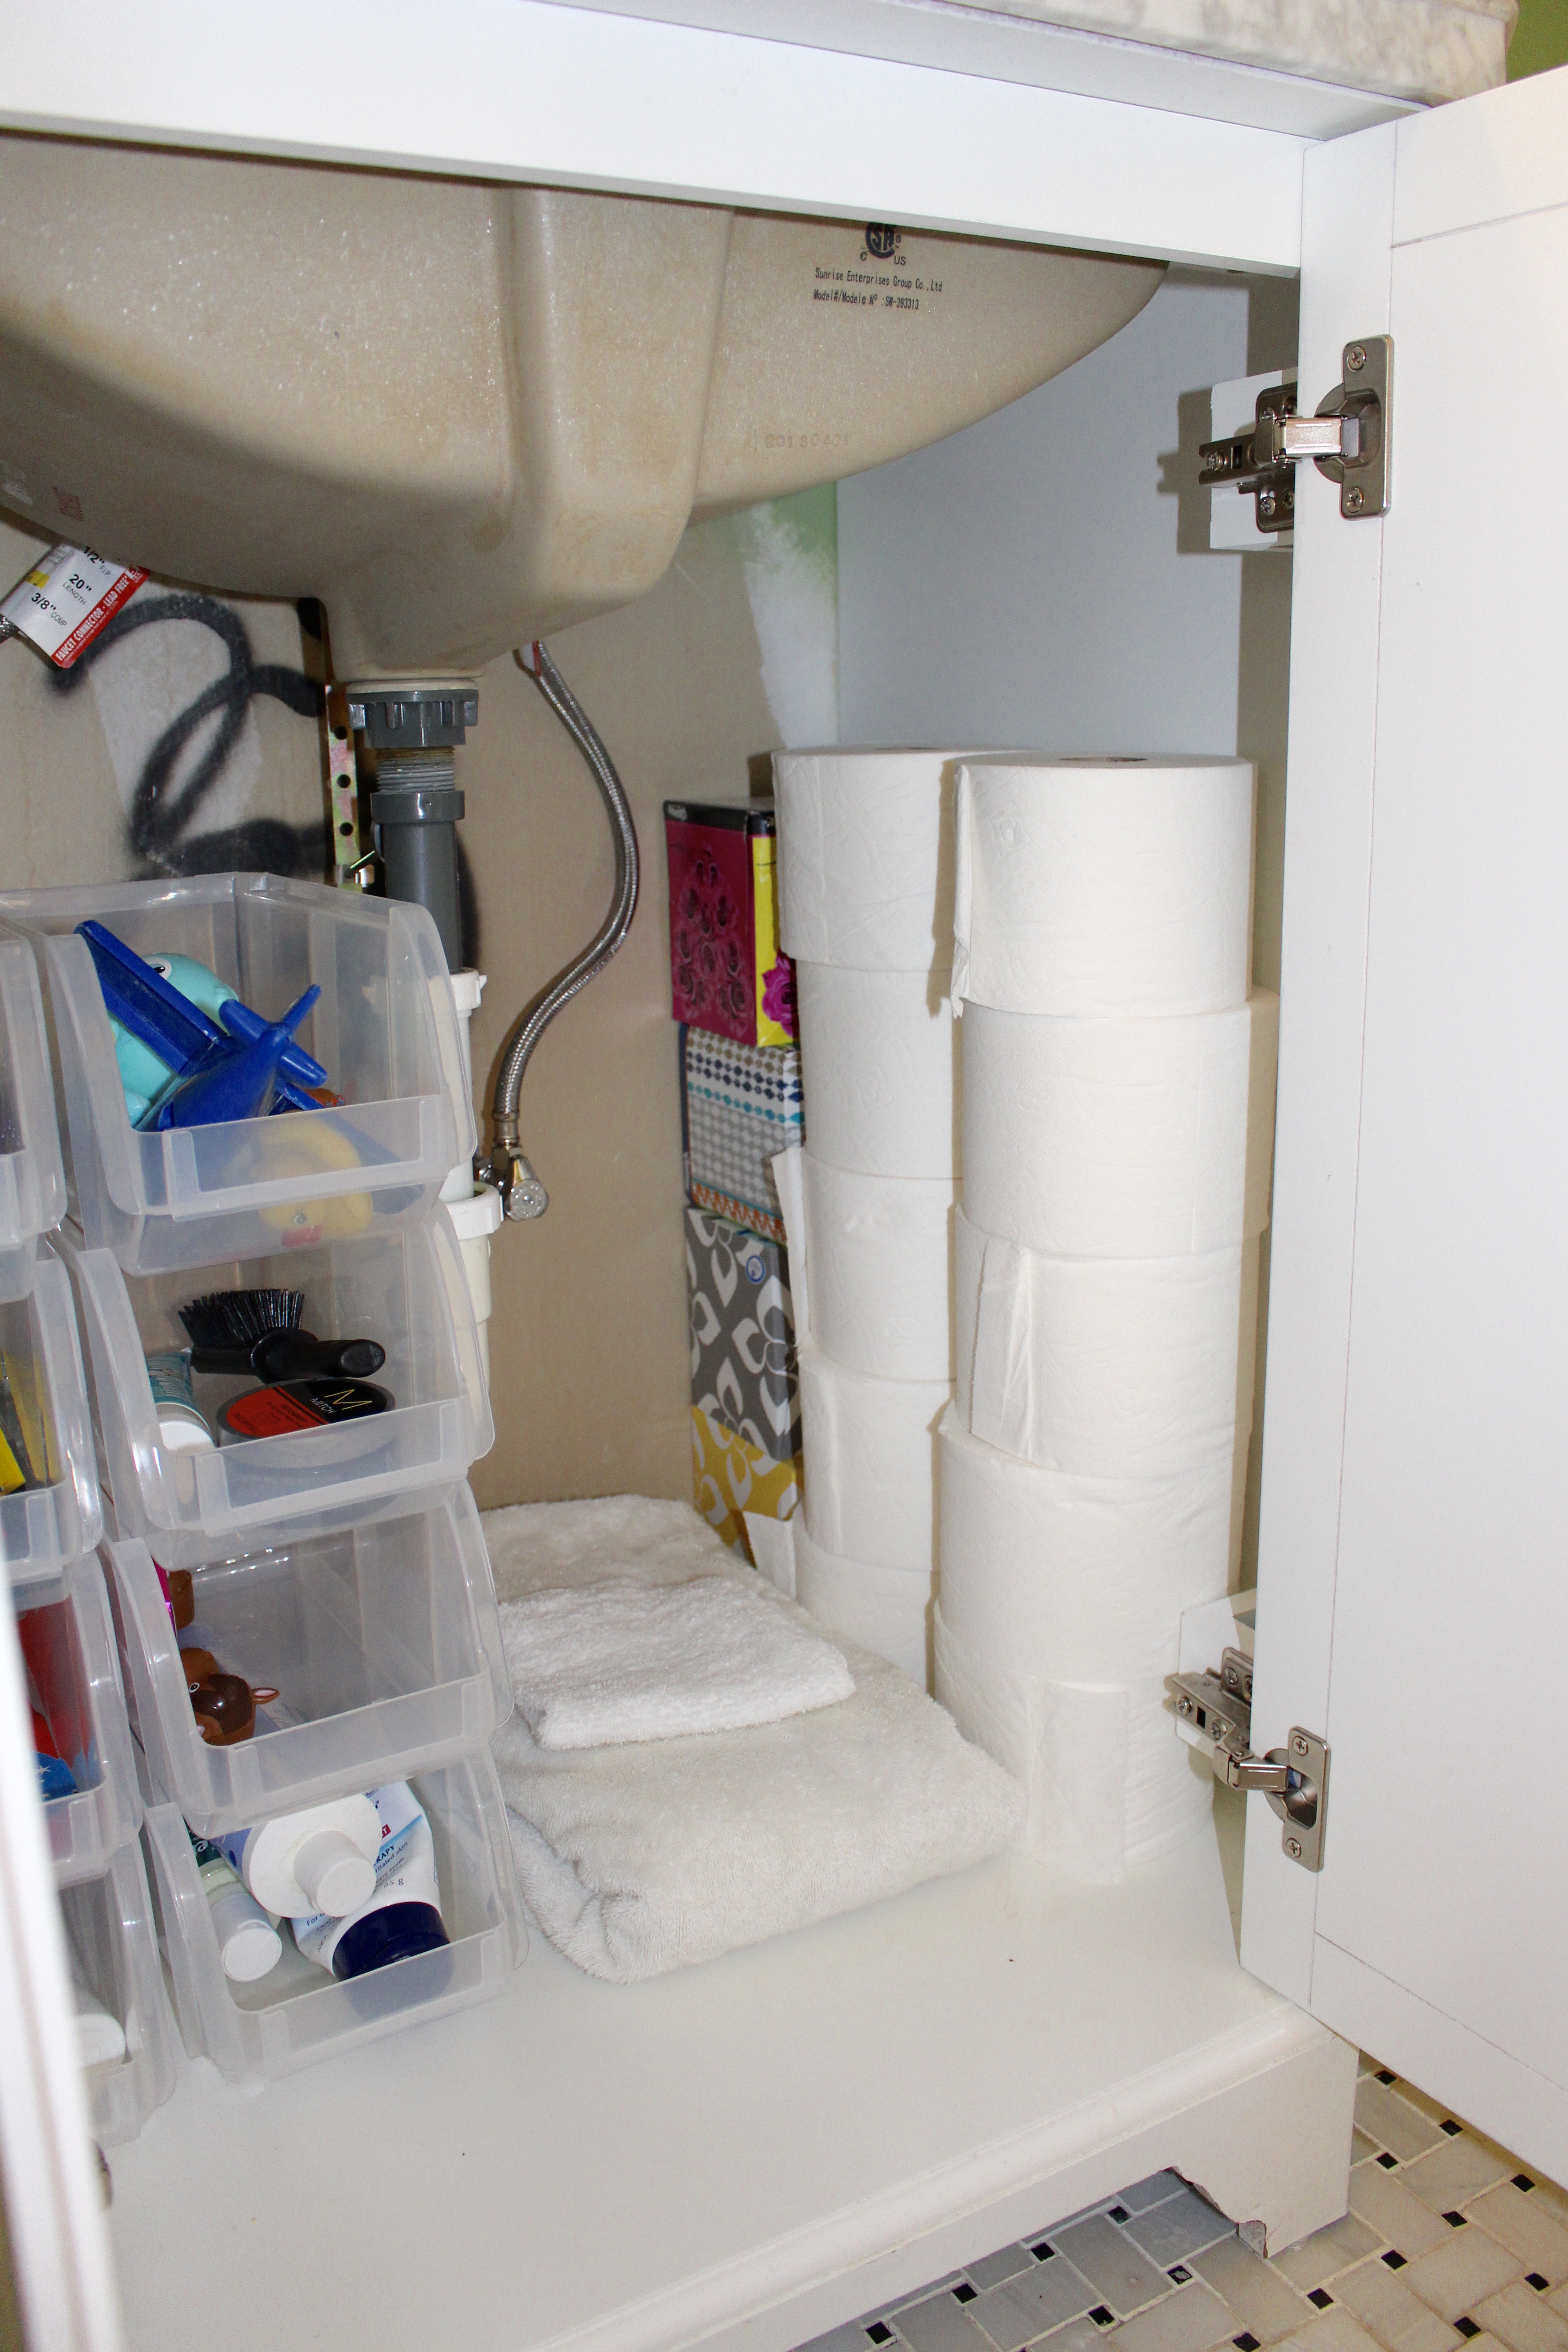 Under the Sink Storage Solutions by www.whitecottagehomeandliving.com